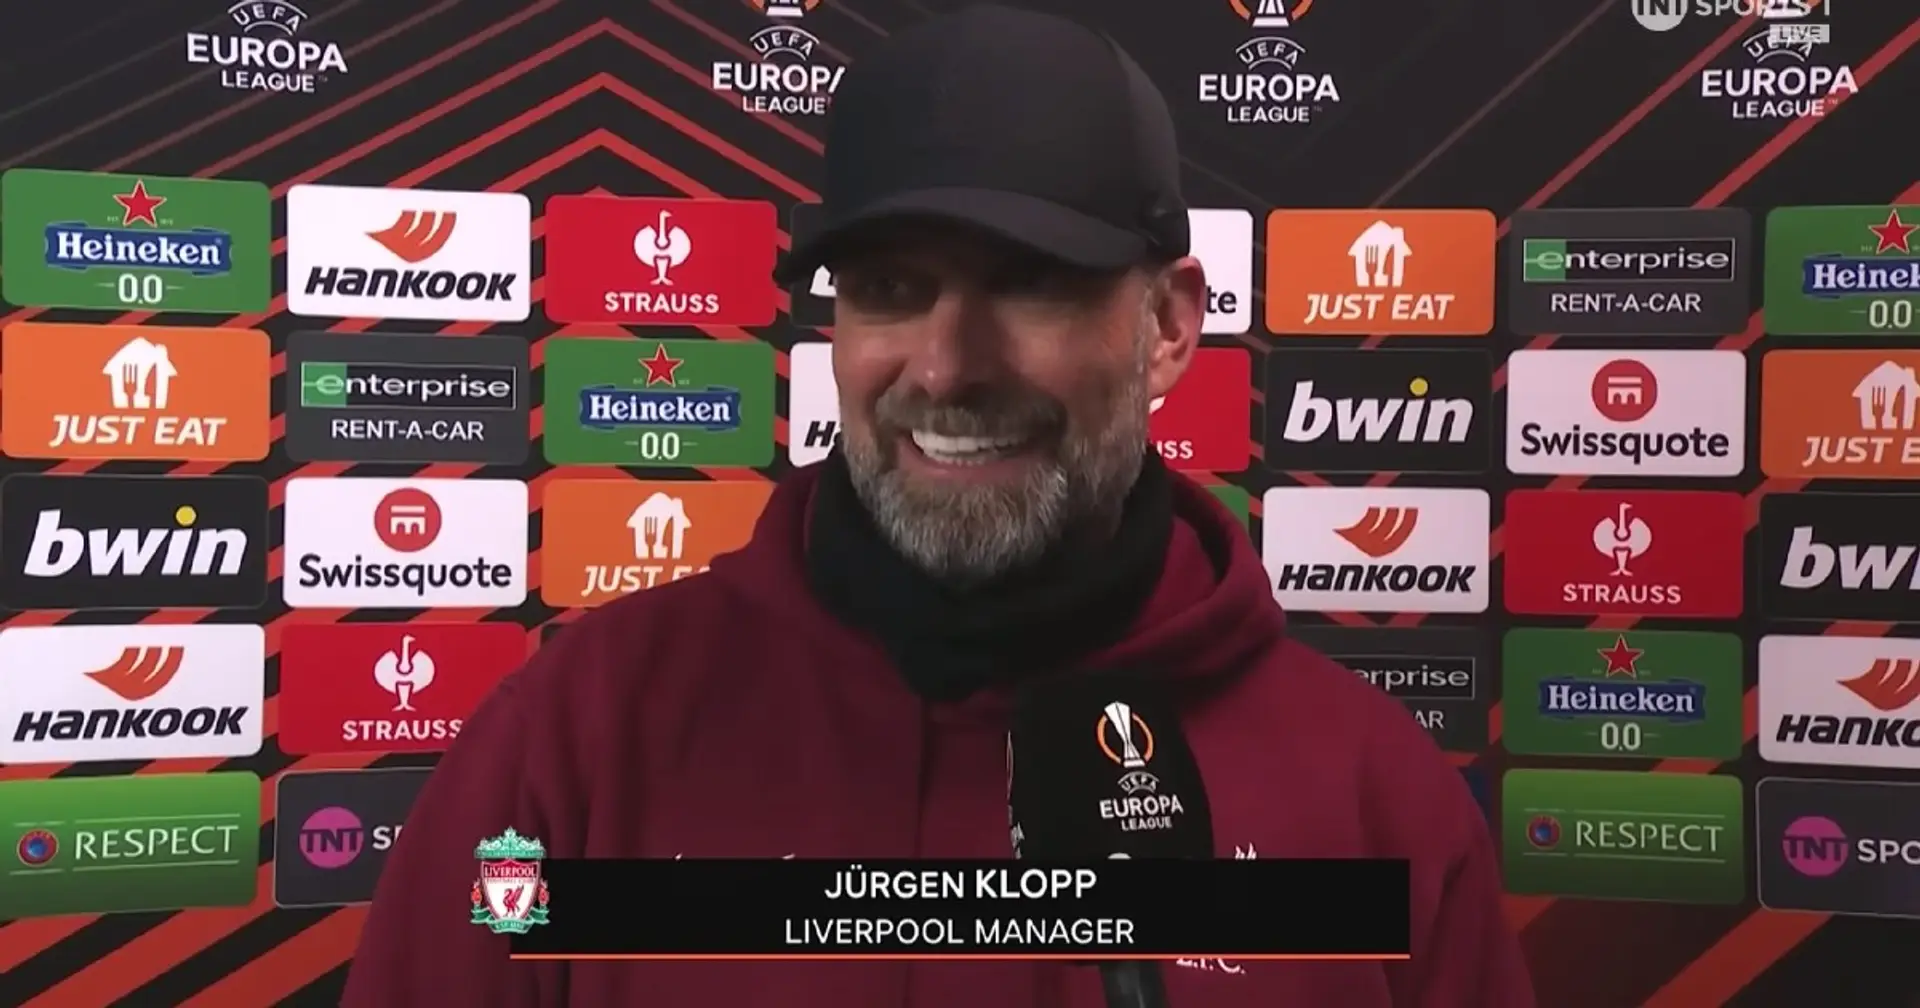 'I have to take what I can get': Klopp when asked how much of a priority Europa League is for Liverpool